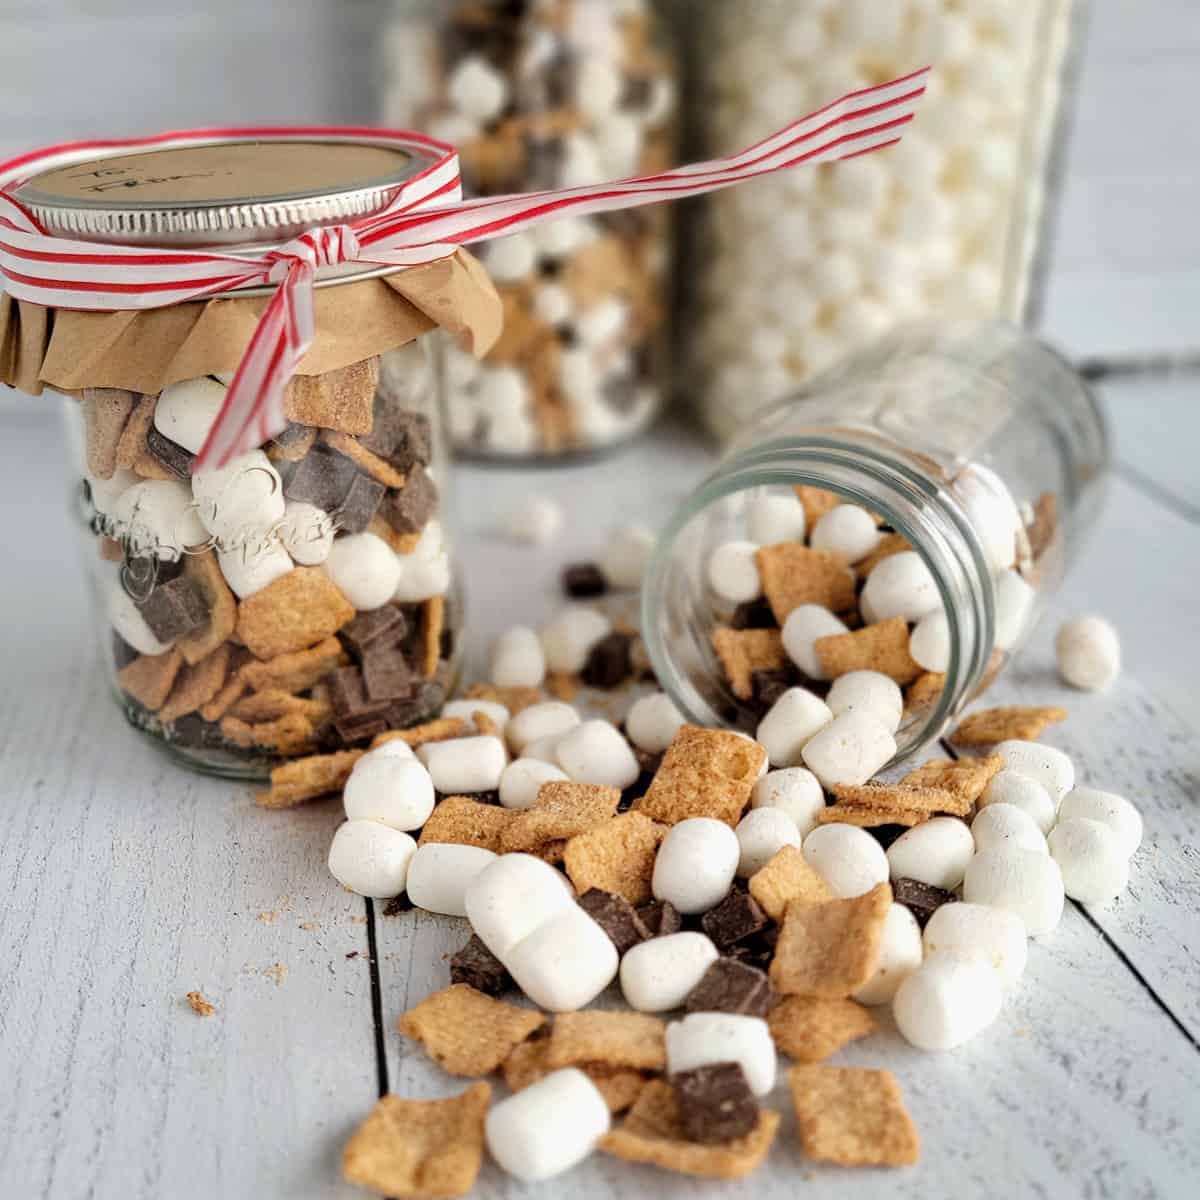 Crunchy S'mores Mix with Dehydrated Marshmallows - The Purposeful Pantry